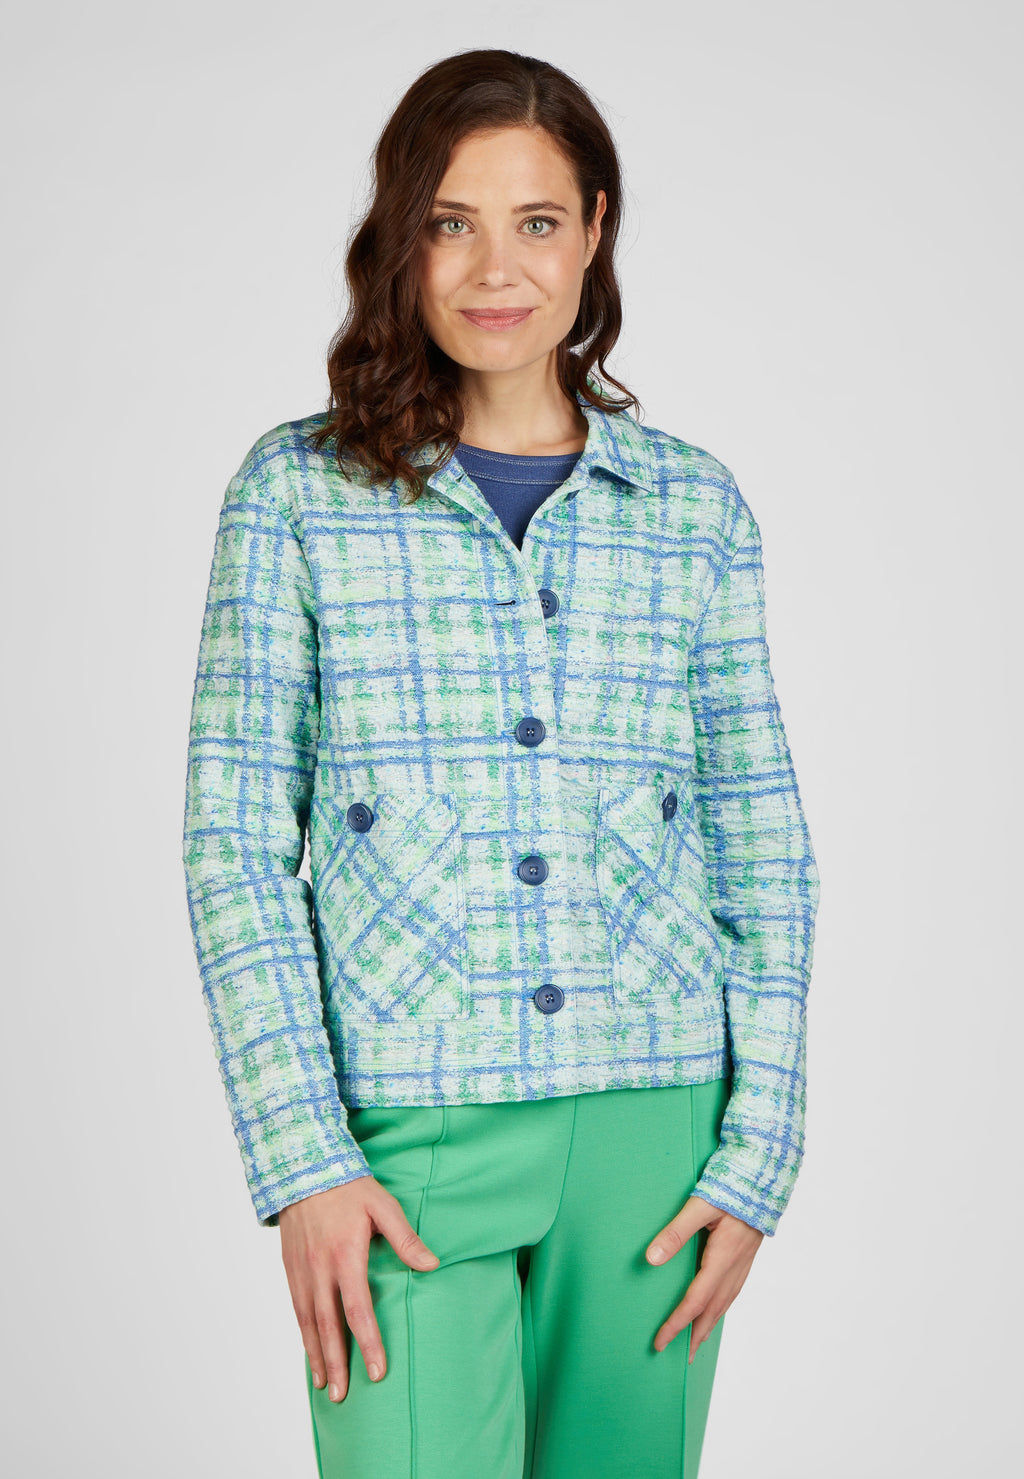 Rabe street cafe tweed style jacket in green and blue, product code 52-214221